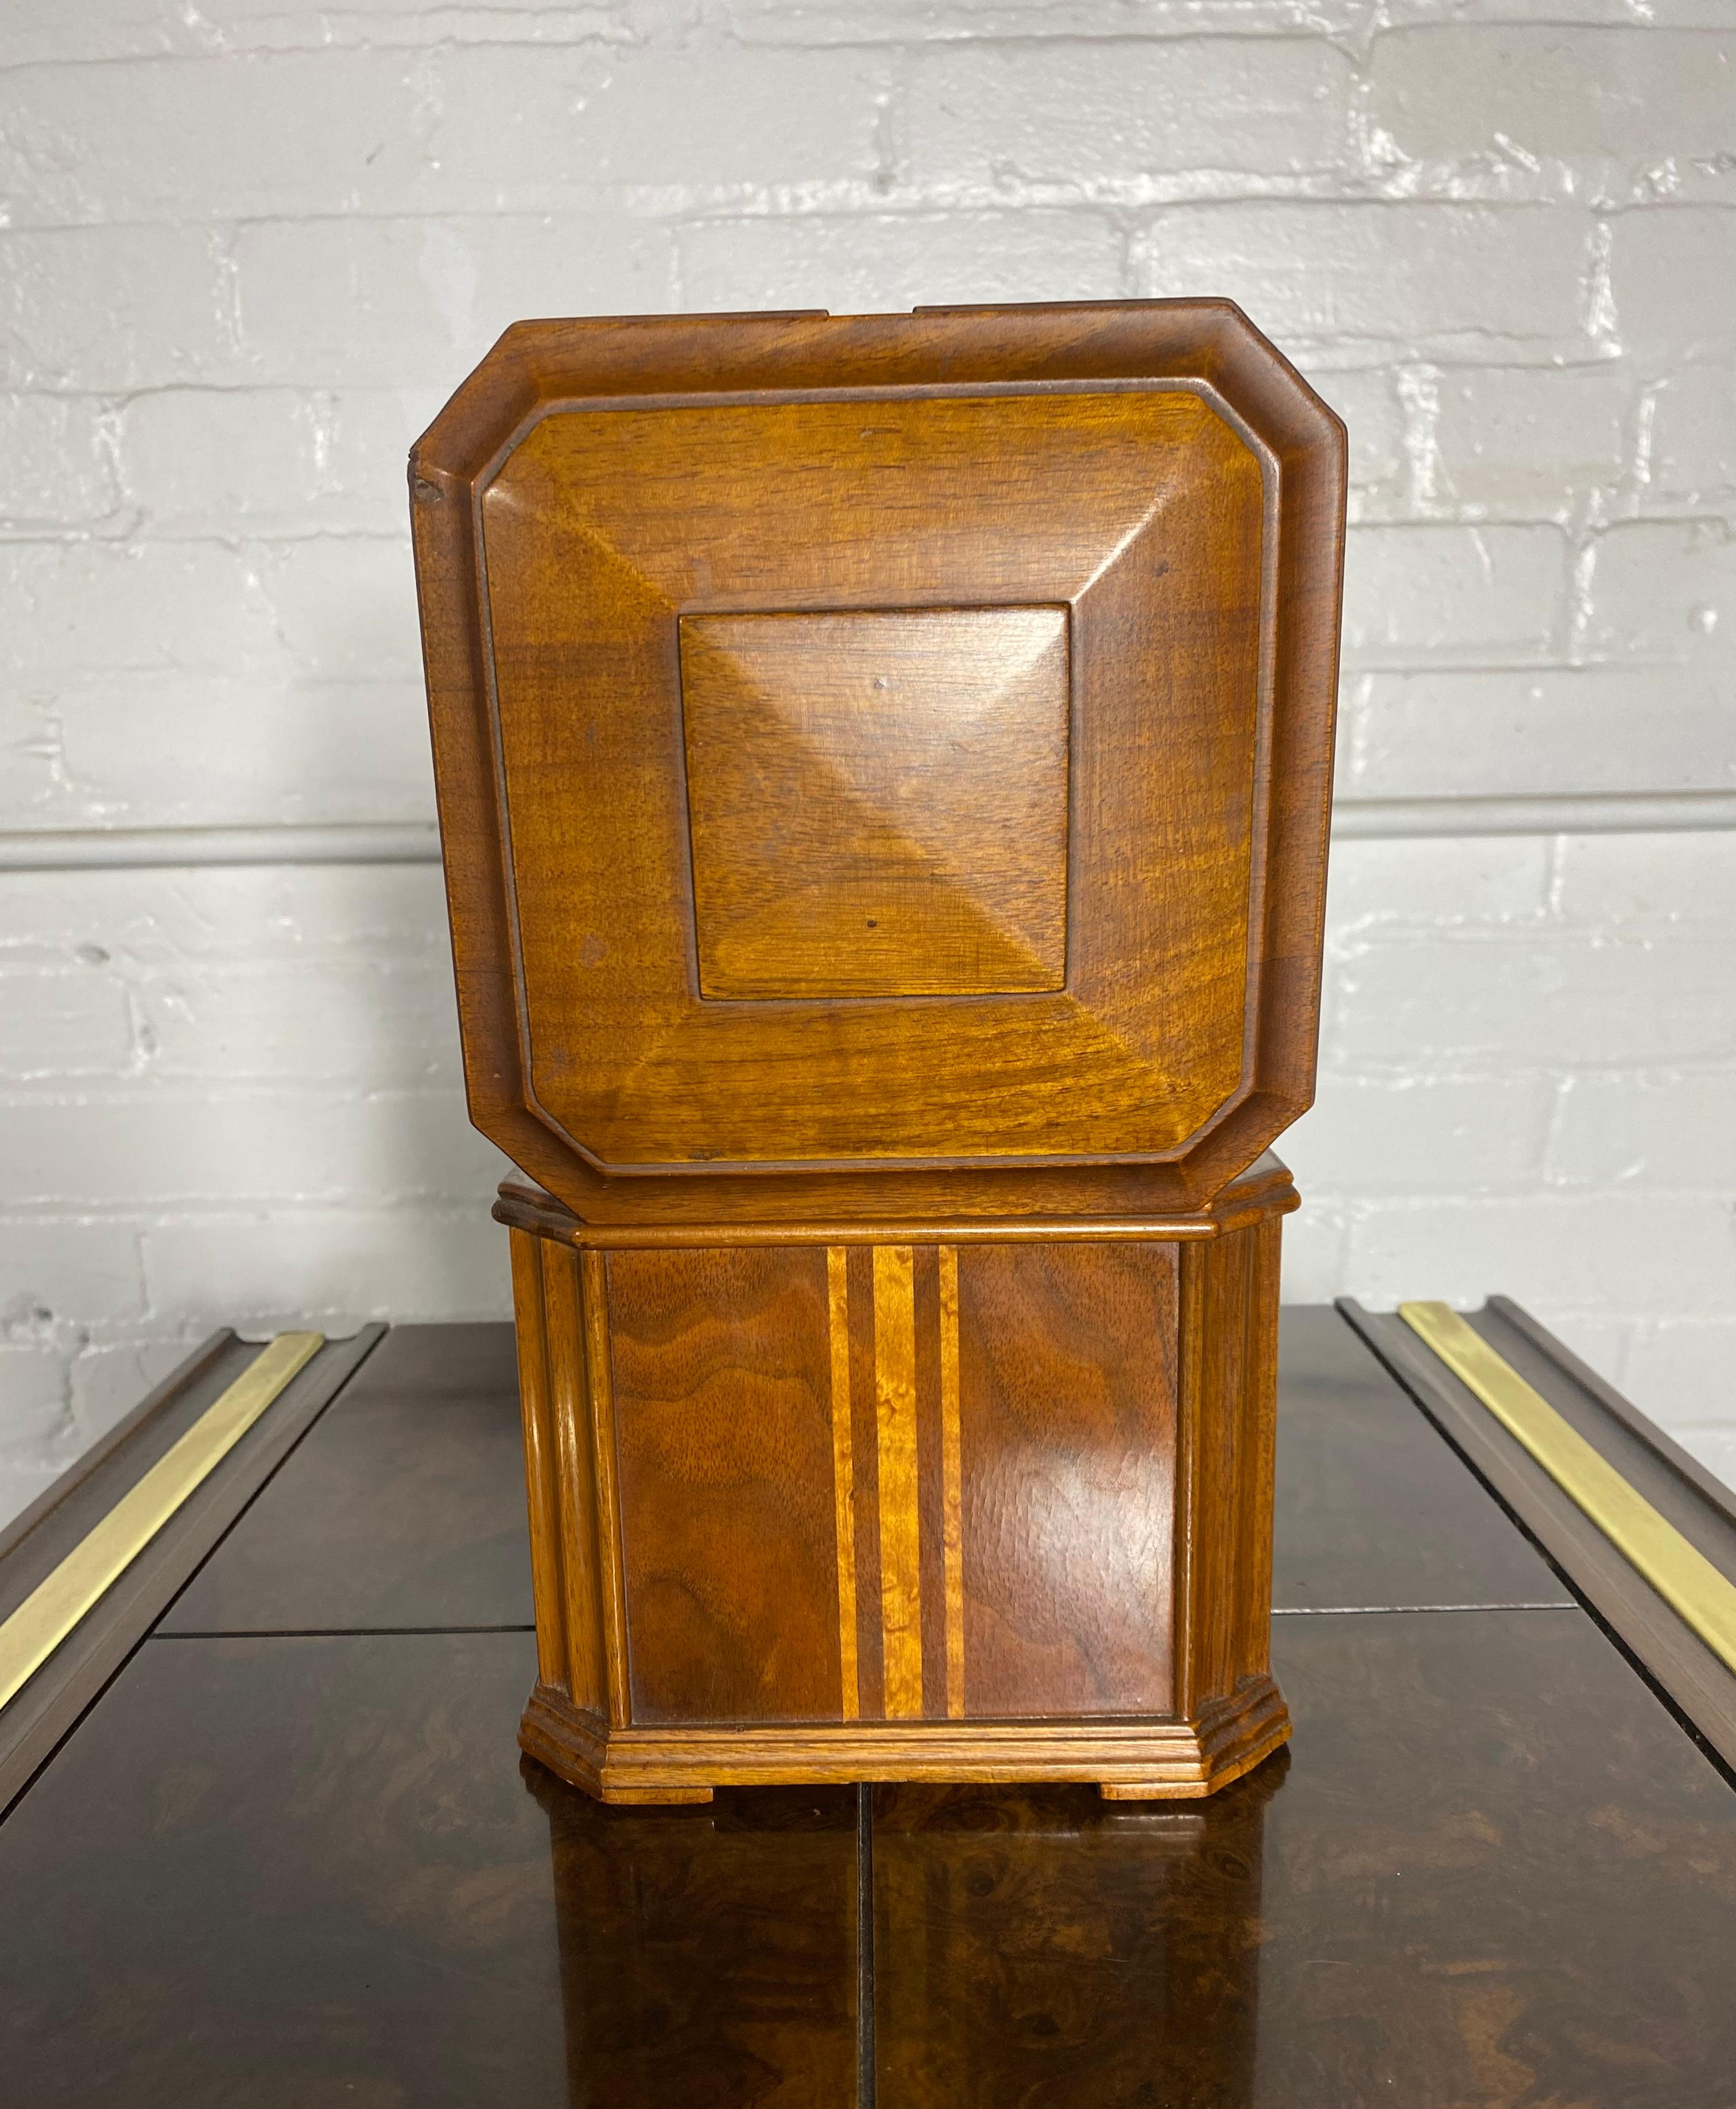 Stunning Art Deco Cigar Humidor by Baromdor.. Birdseye Maple and Walnut.. Classic 1930s design. Superior quality and construction,, Great desk accessory, sleek .simple design